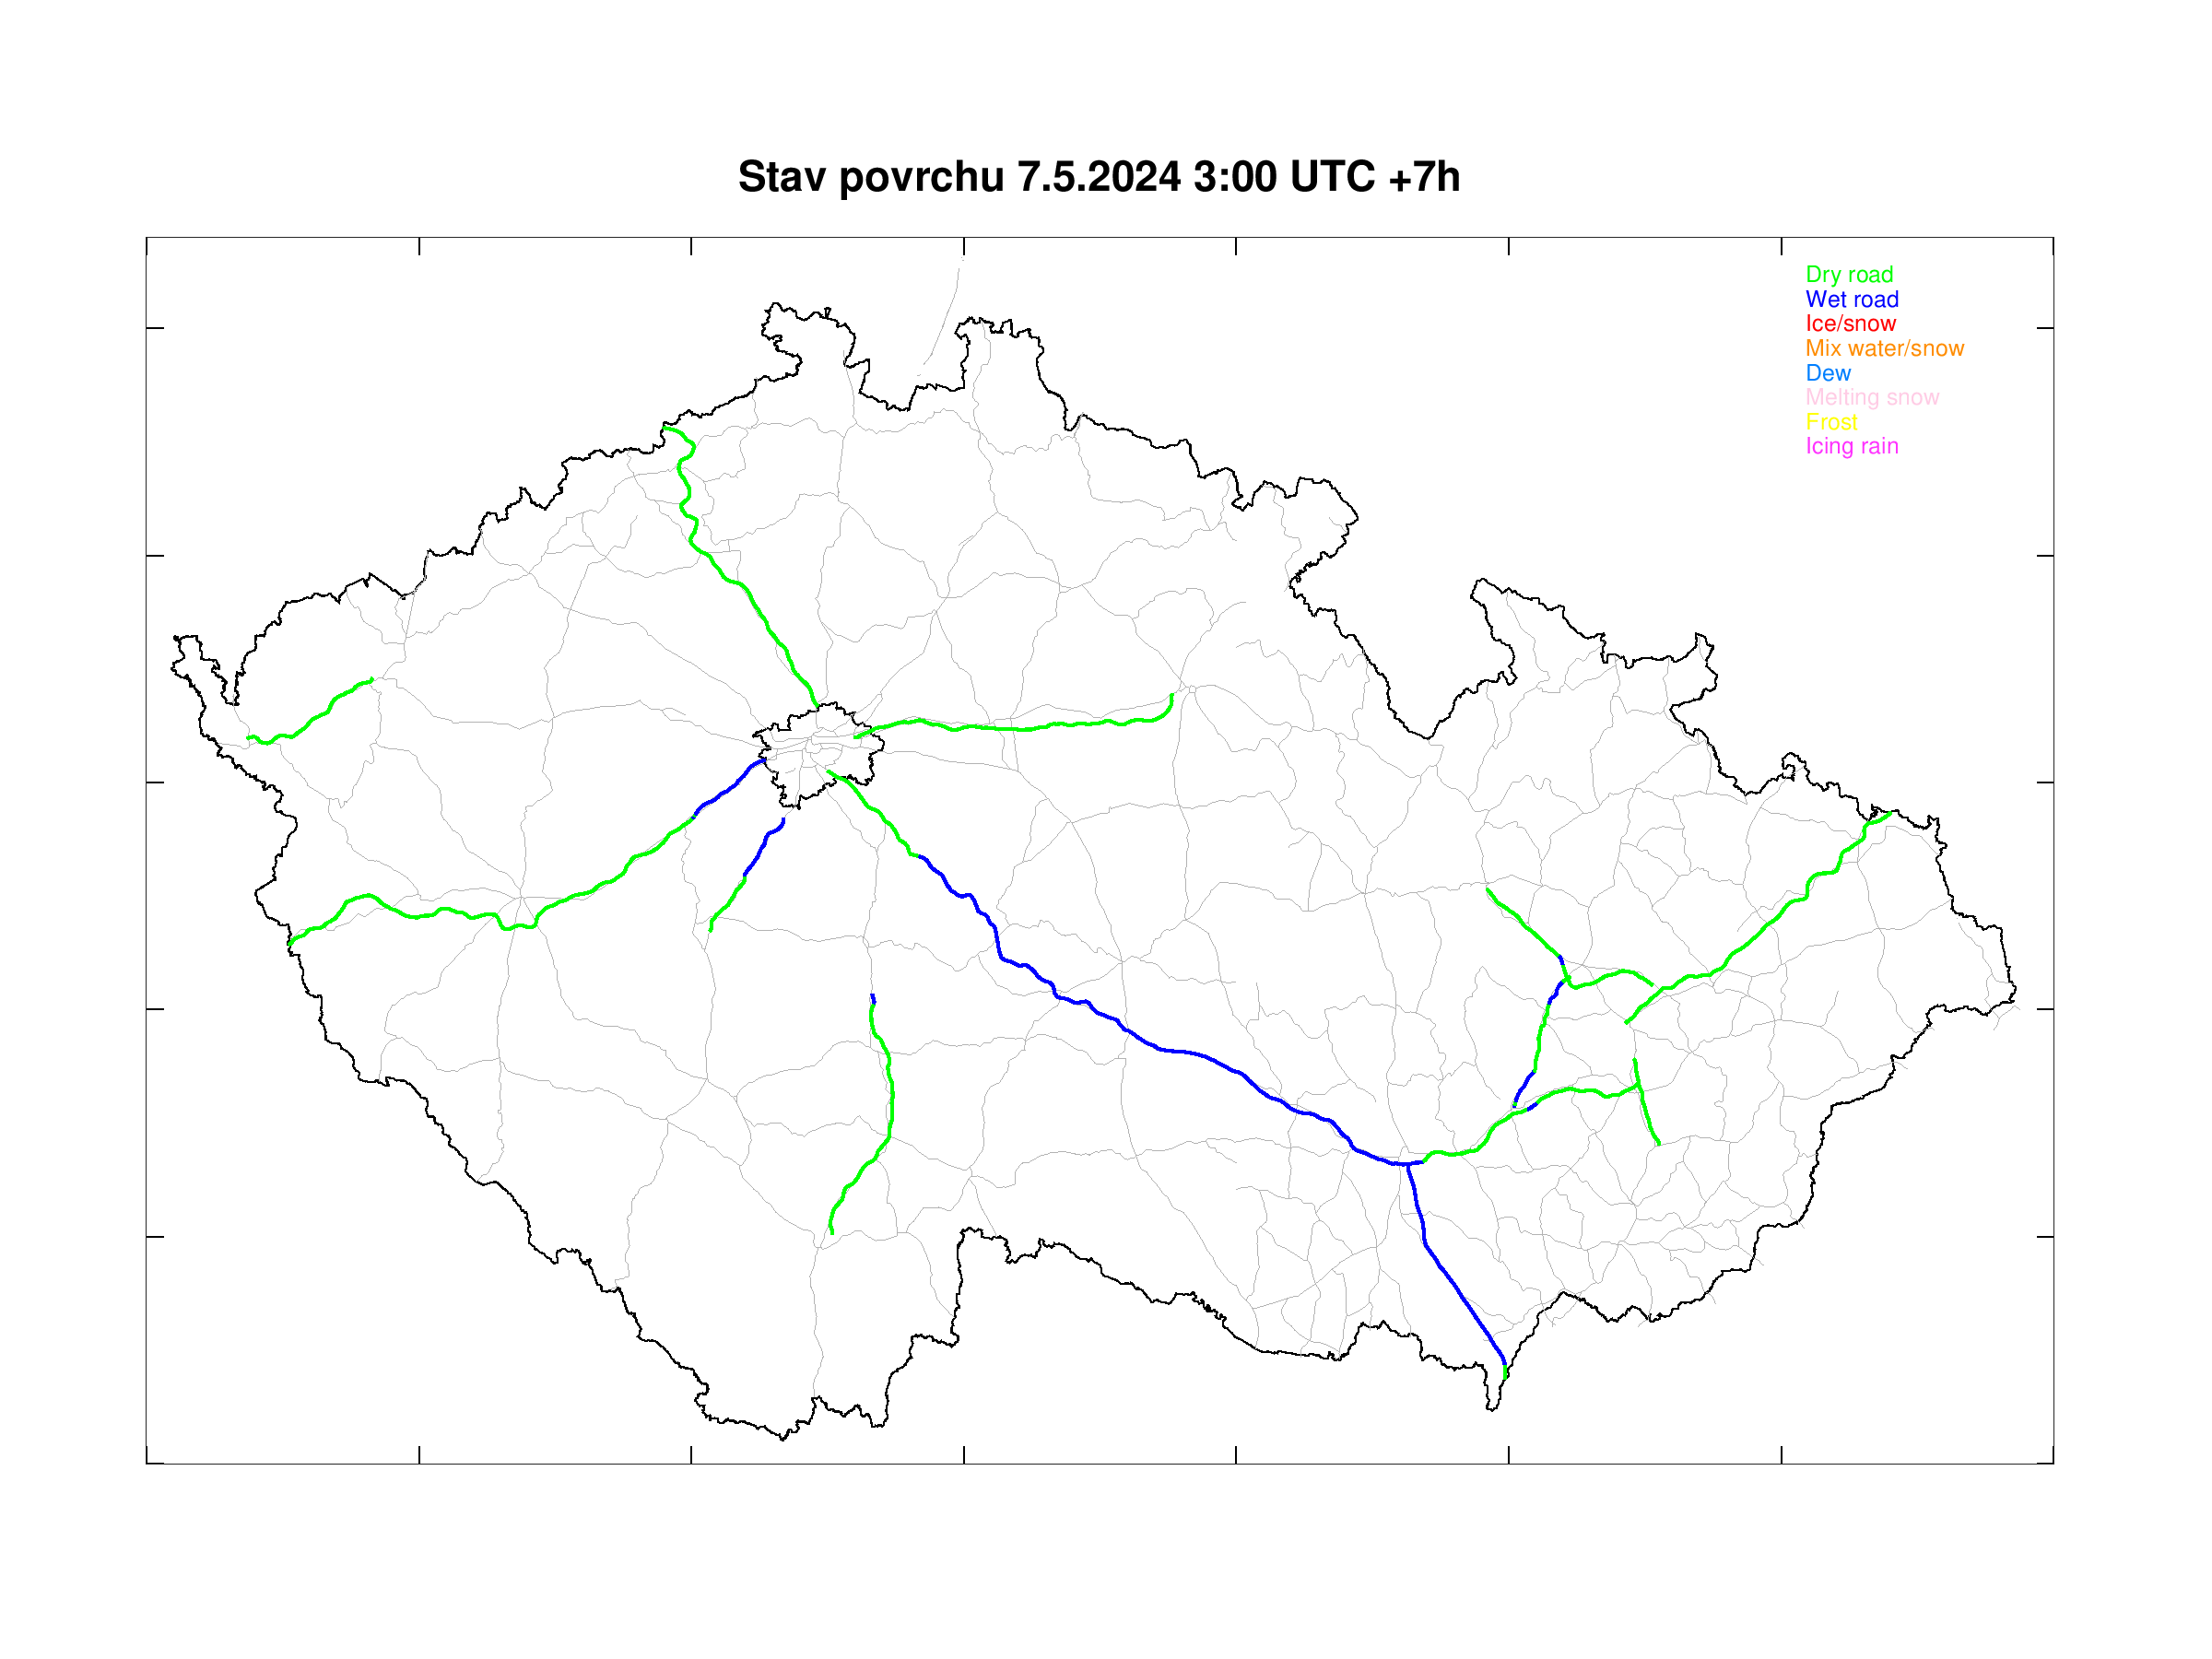 Road surface condition forecast for Czech highways +7h